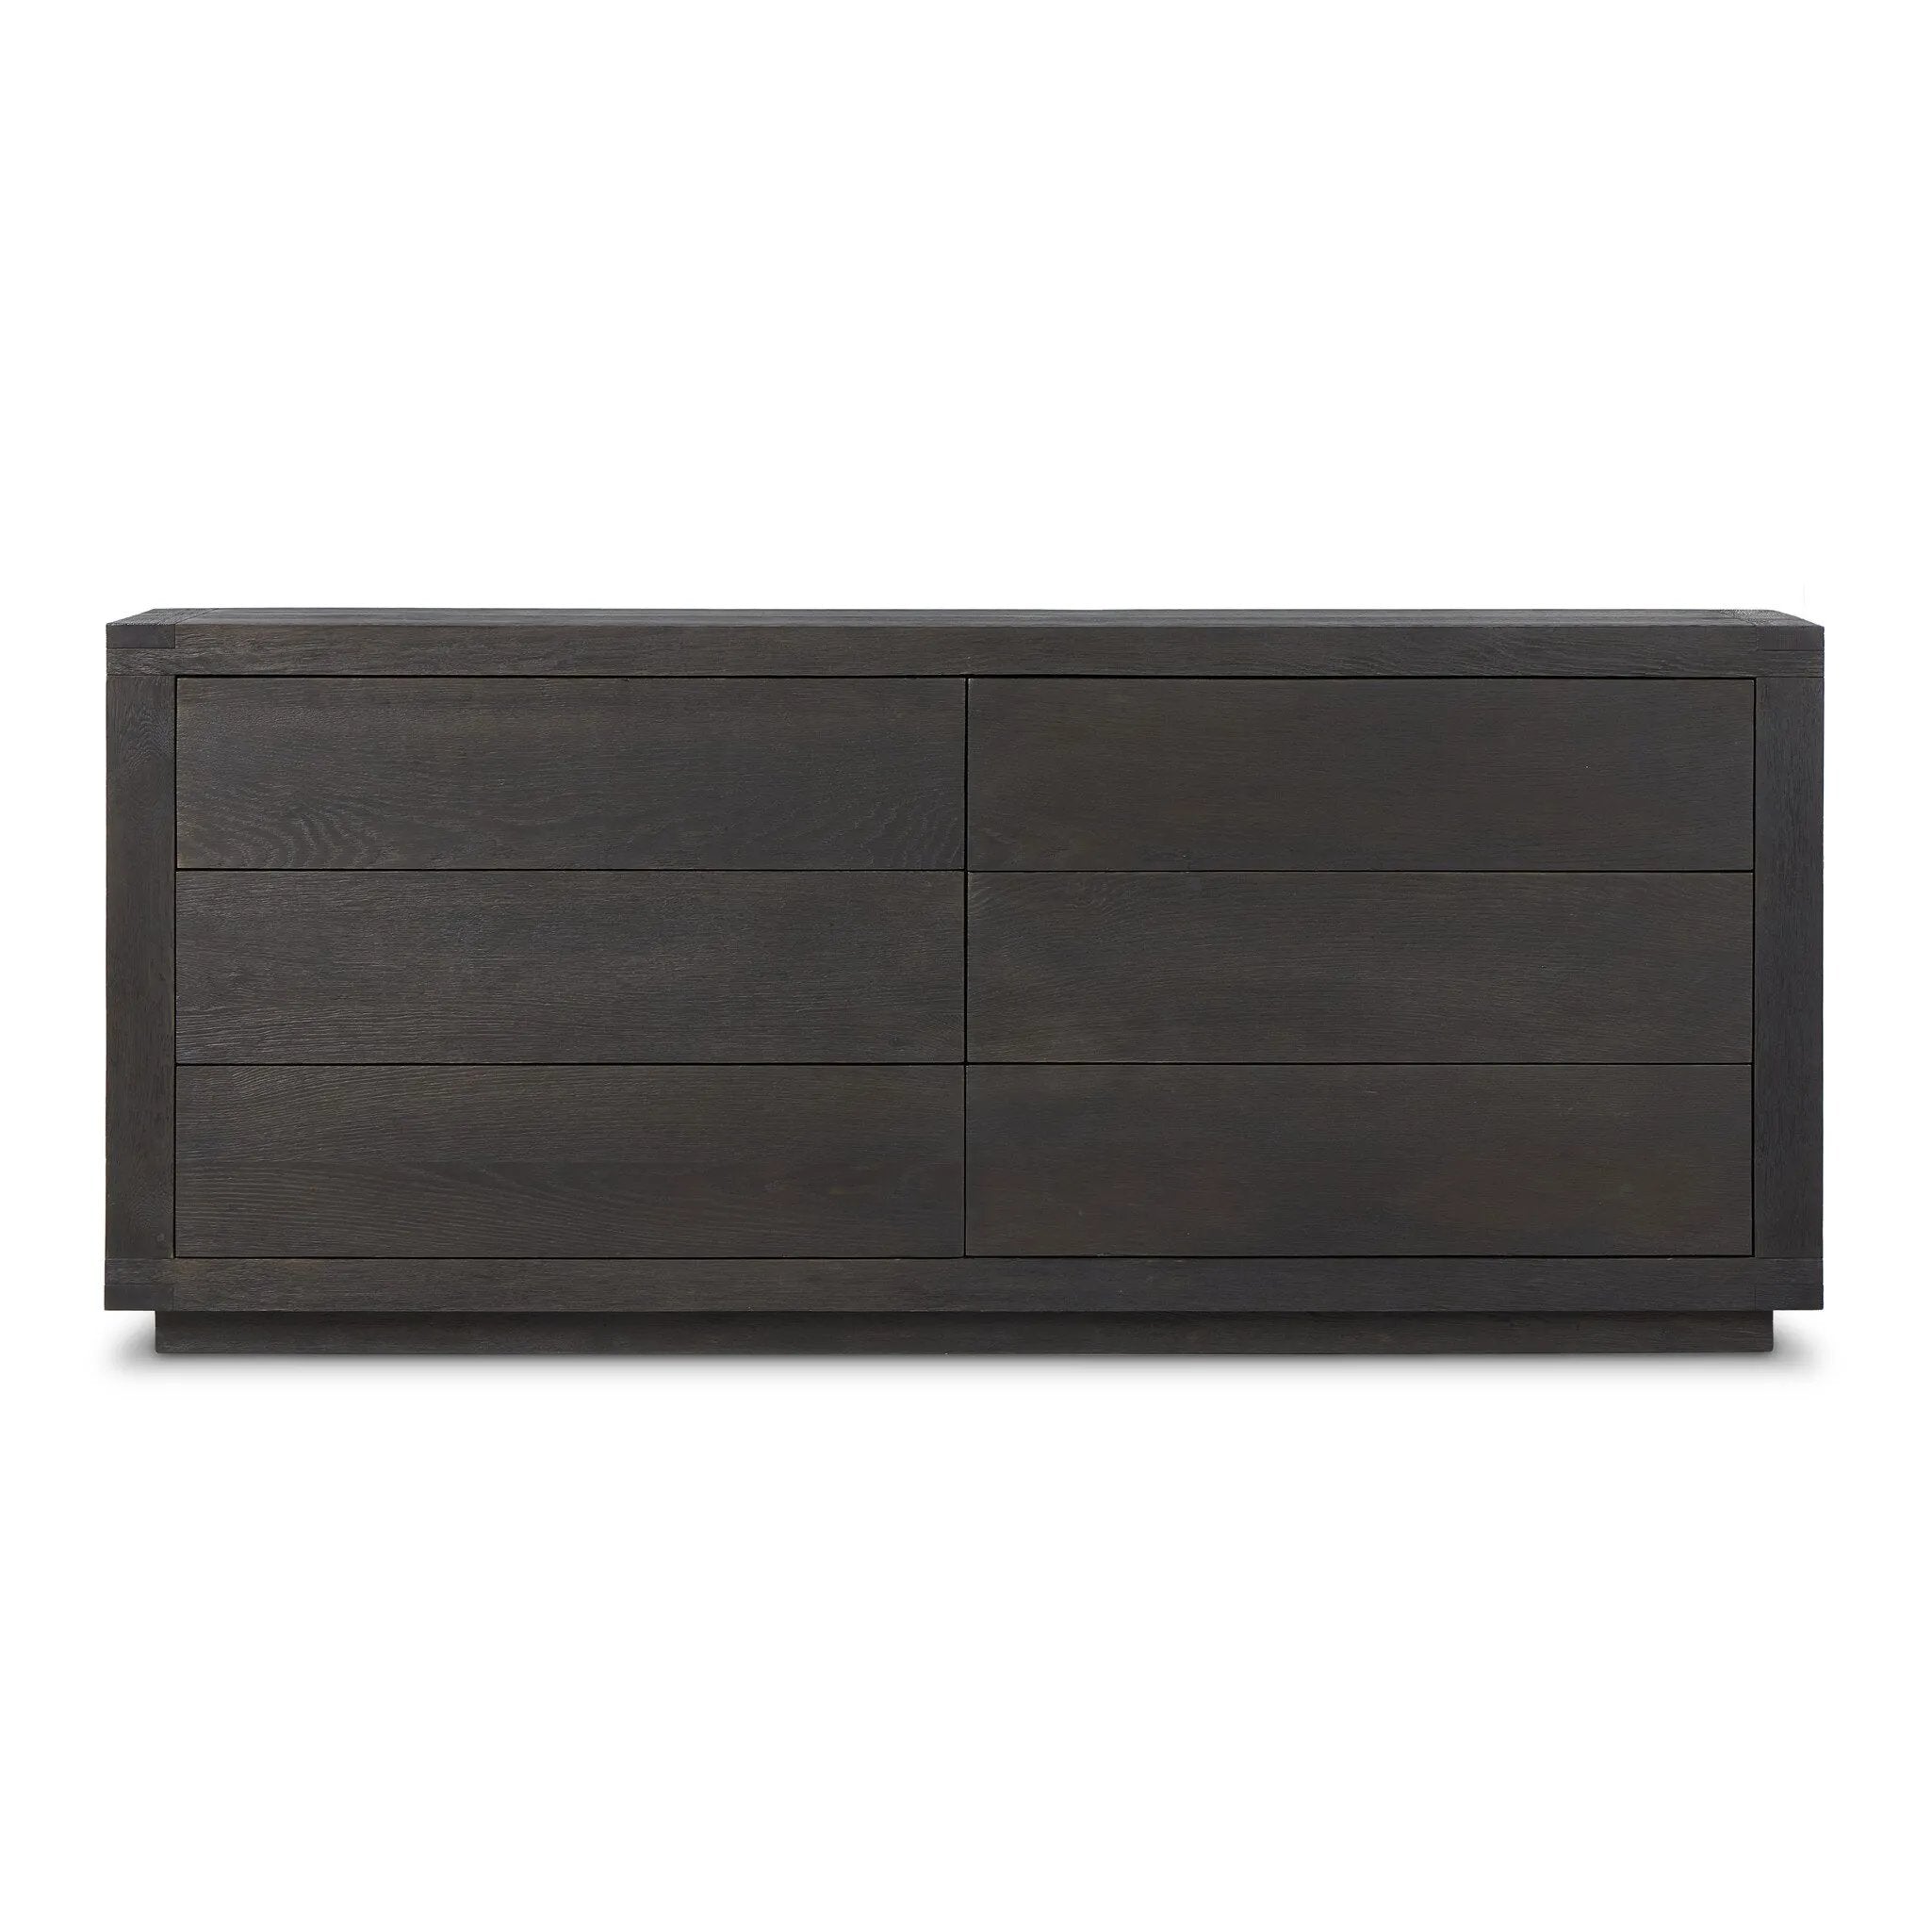 Black-finished oak shapes a streamlined box-style dresser, with lap joint corners for a detail-driven touch.Collection: Bennet Amethyst Home provides interior design, new home construction design consulting, vintage area rugs, and lighting in the Charlotte metro area.